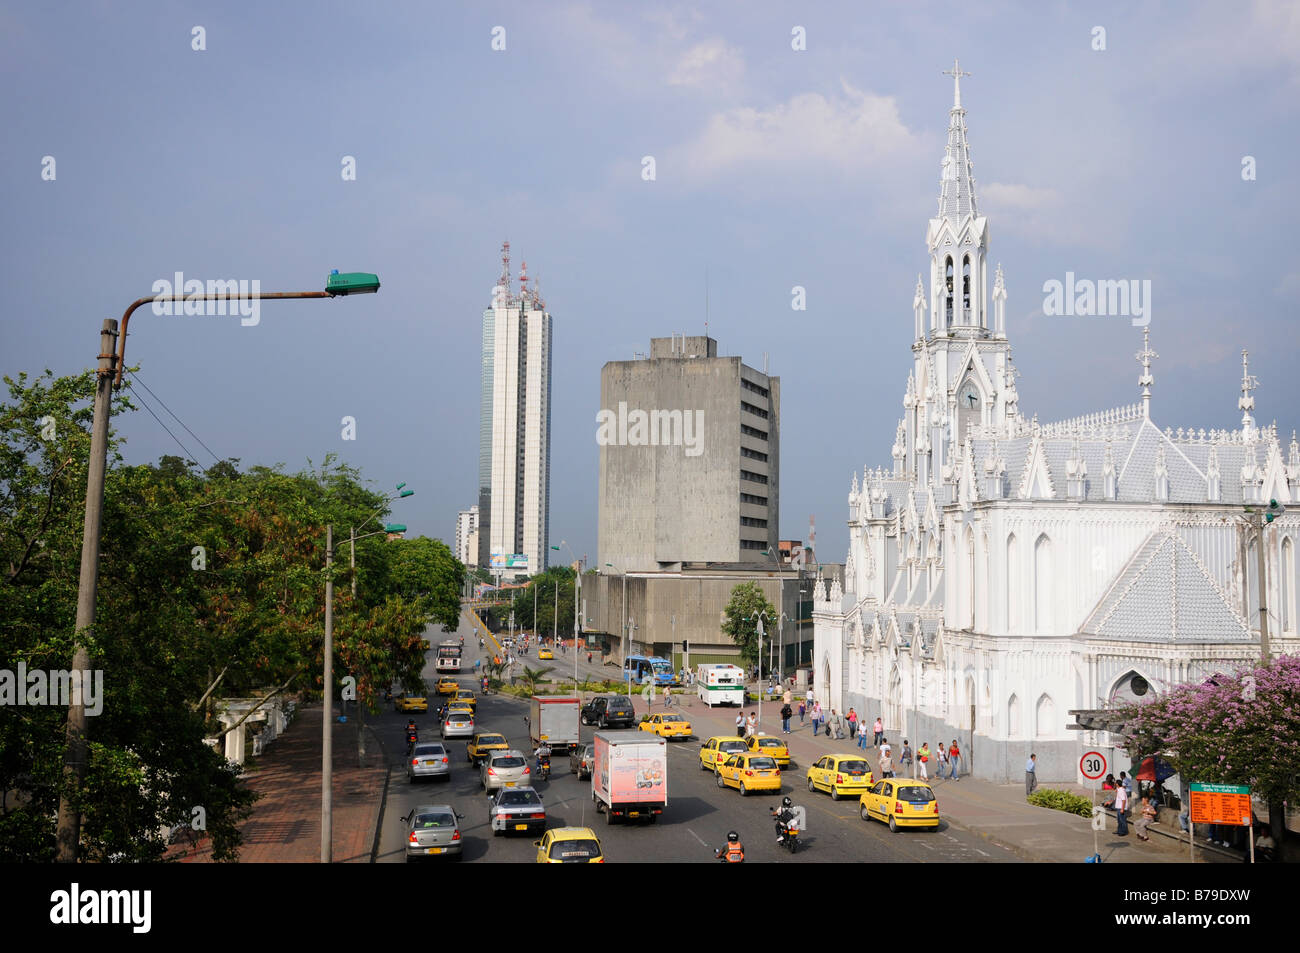 A view of the city center in Cali, Columbia. Stock Photo